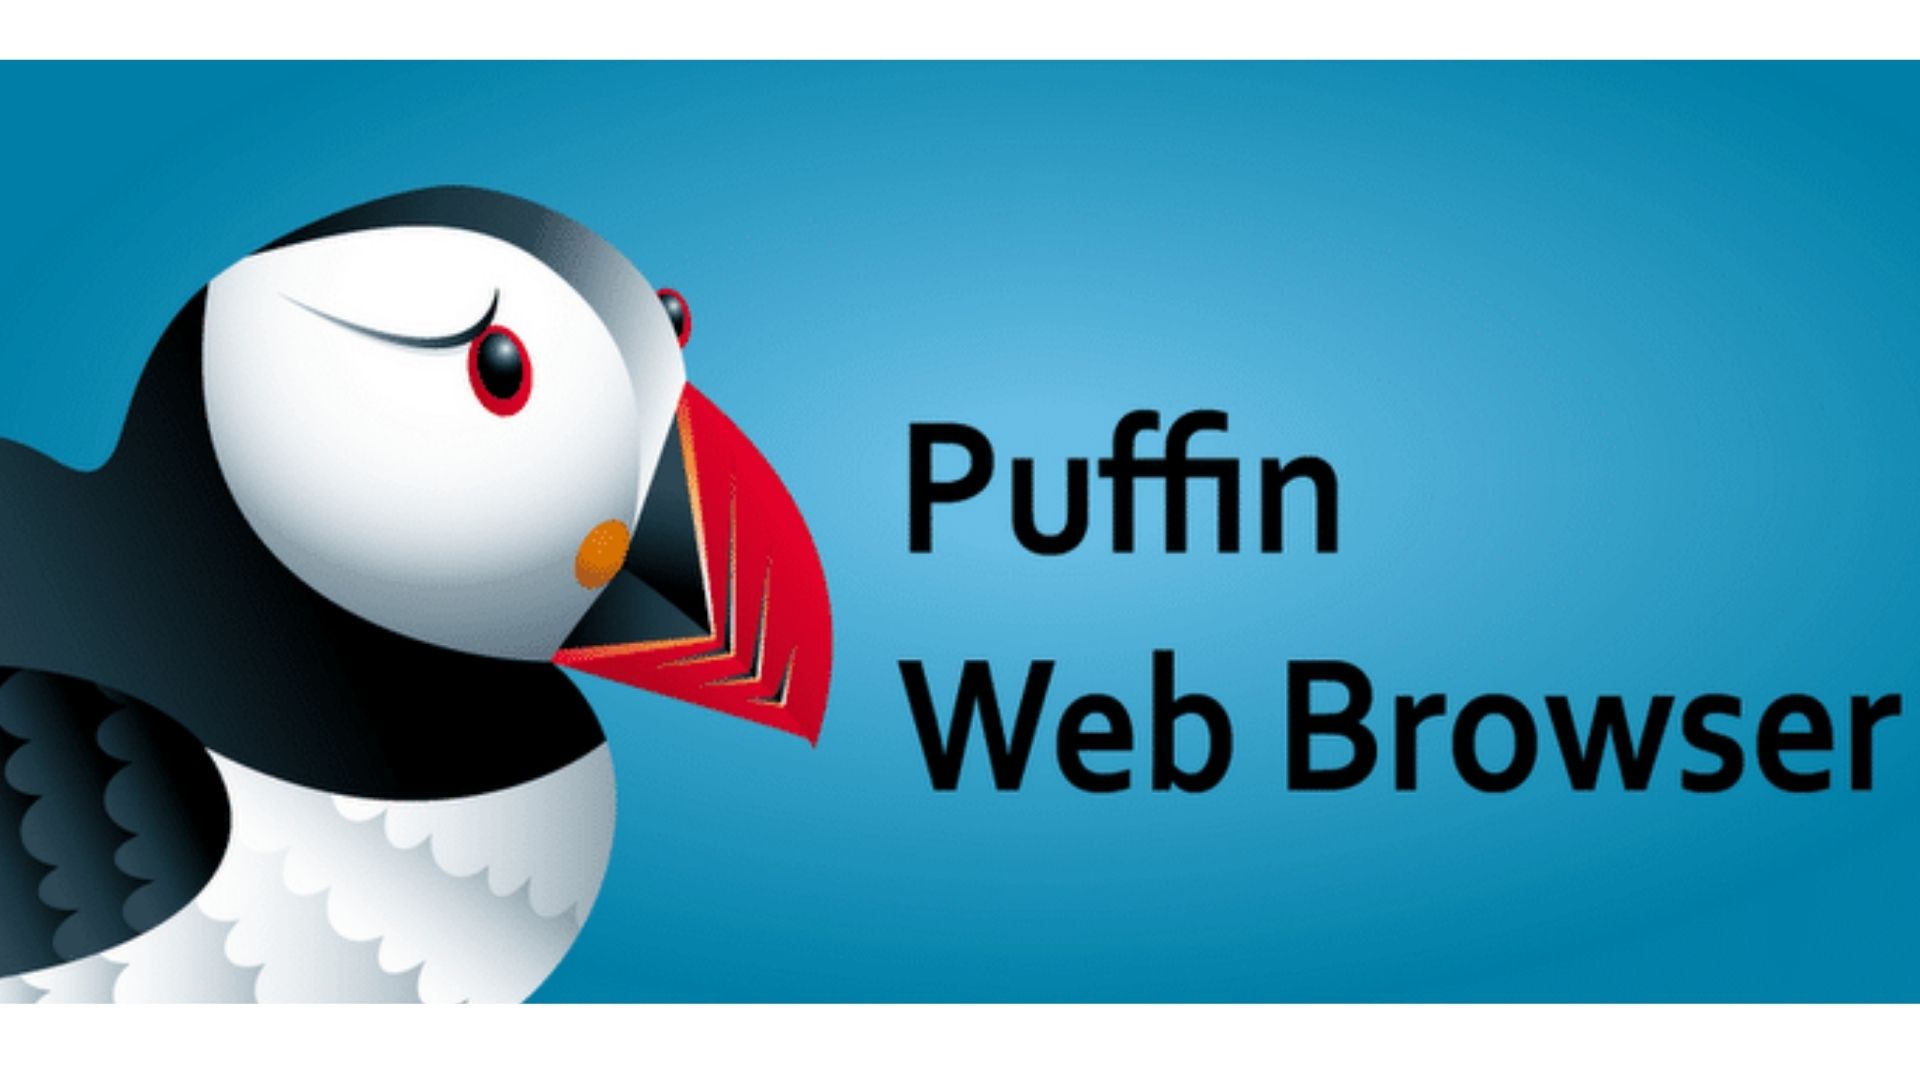 download puffin browser for pc windows